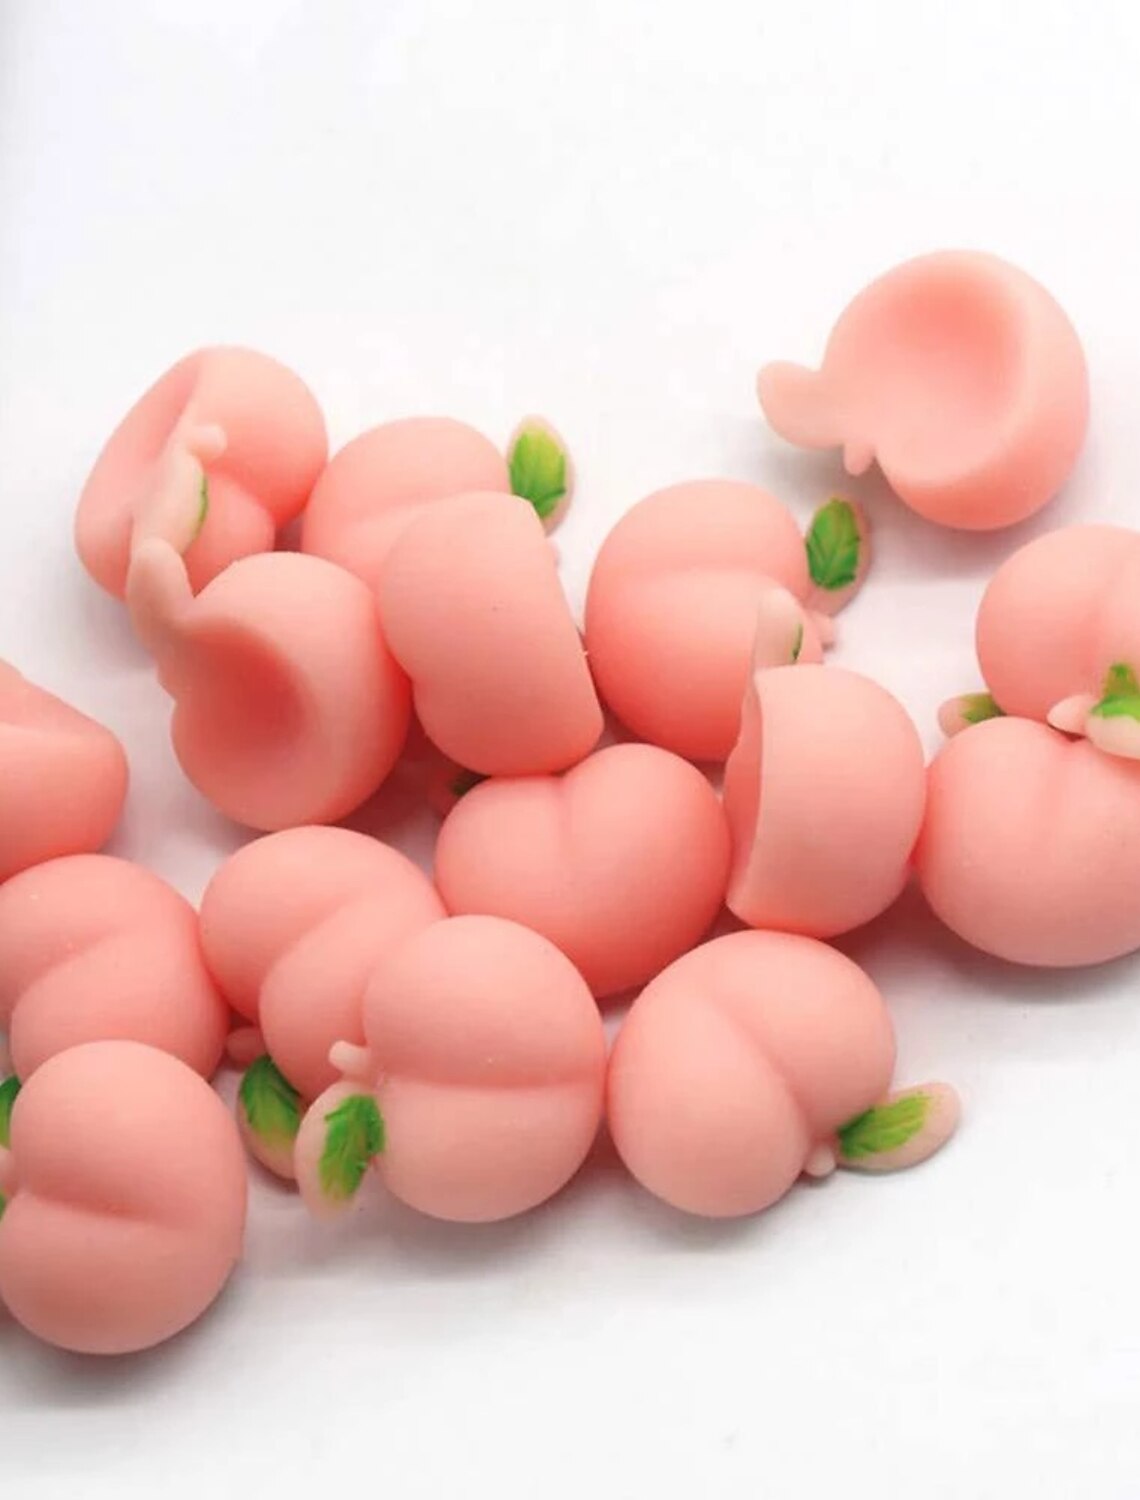 4pcs Peach Squeeze Toy Banana Squishy DNA Stress Ball Fidget Stress Relief Toys 